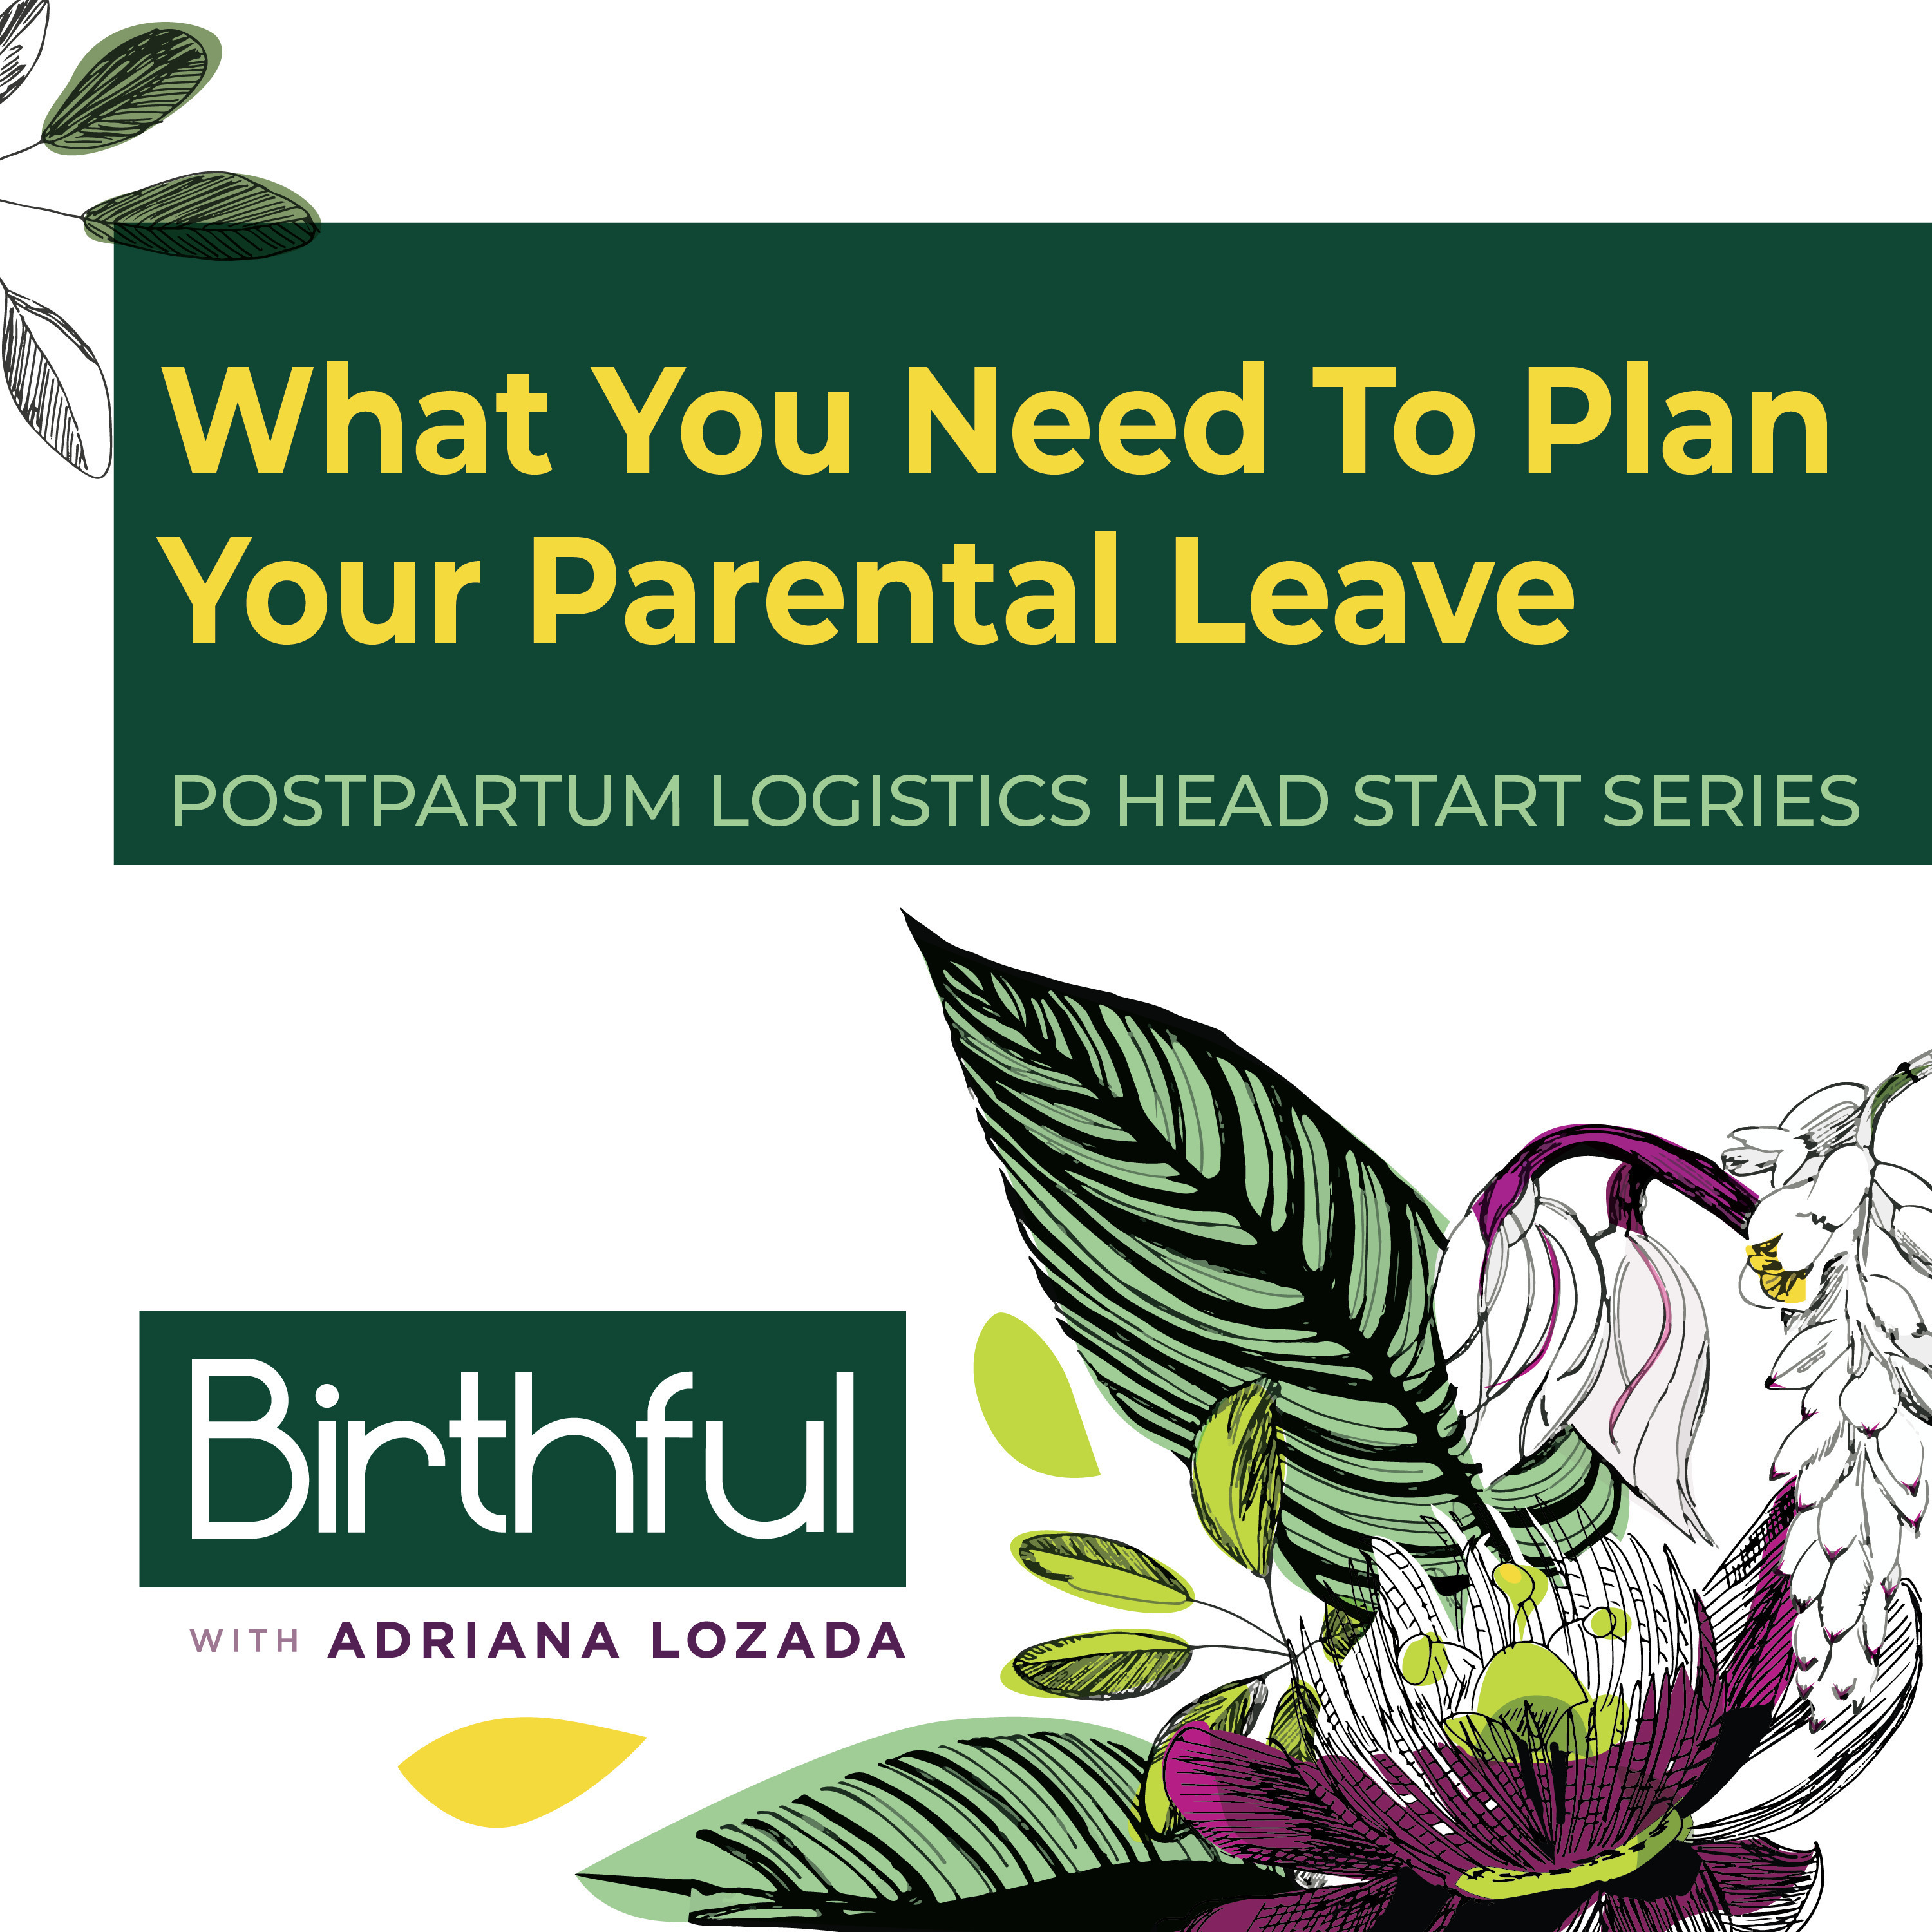 What You Need To Plan Your Parental Leave